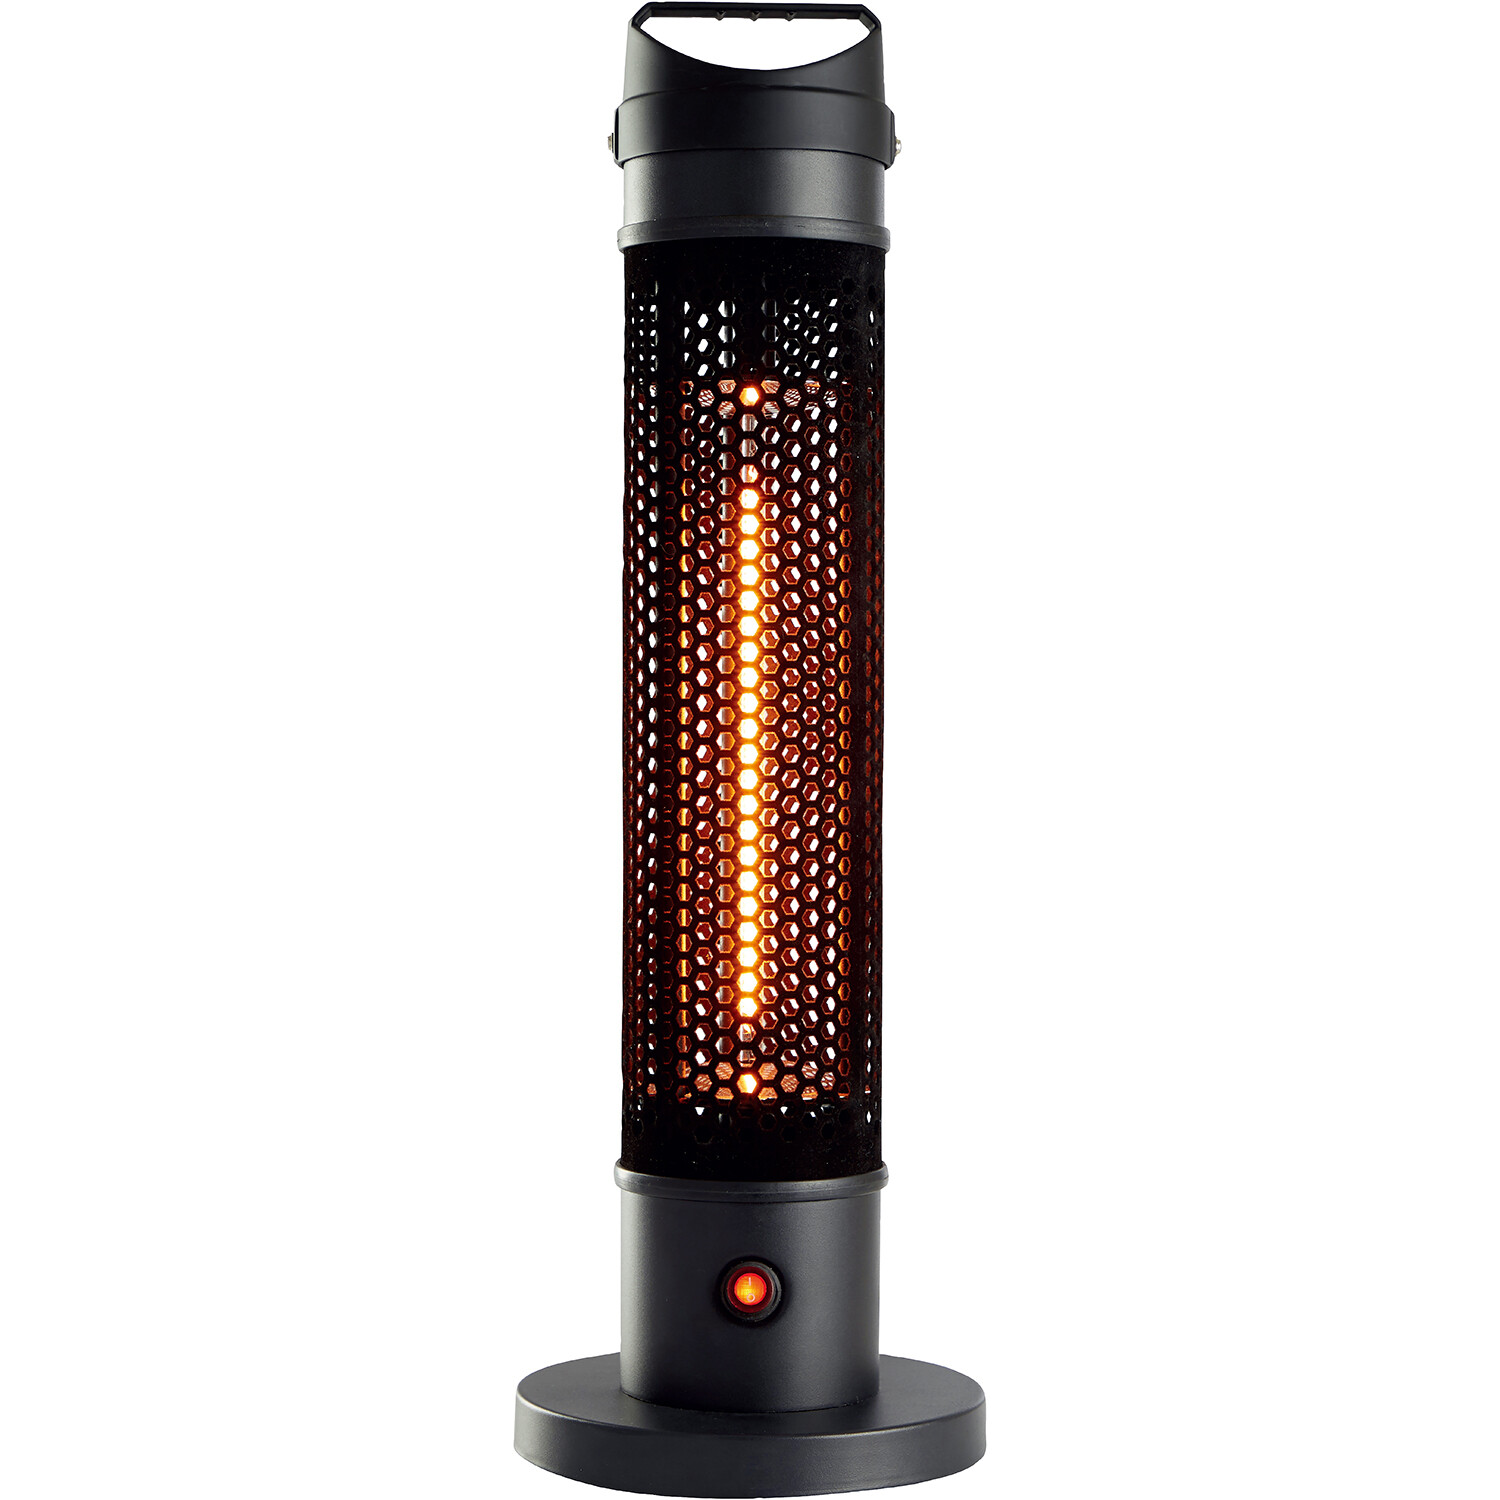 Table Top Patio Heater Image